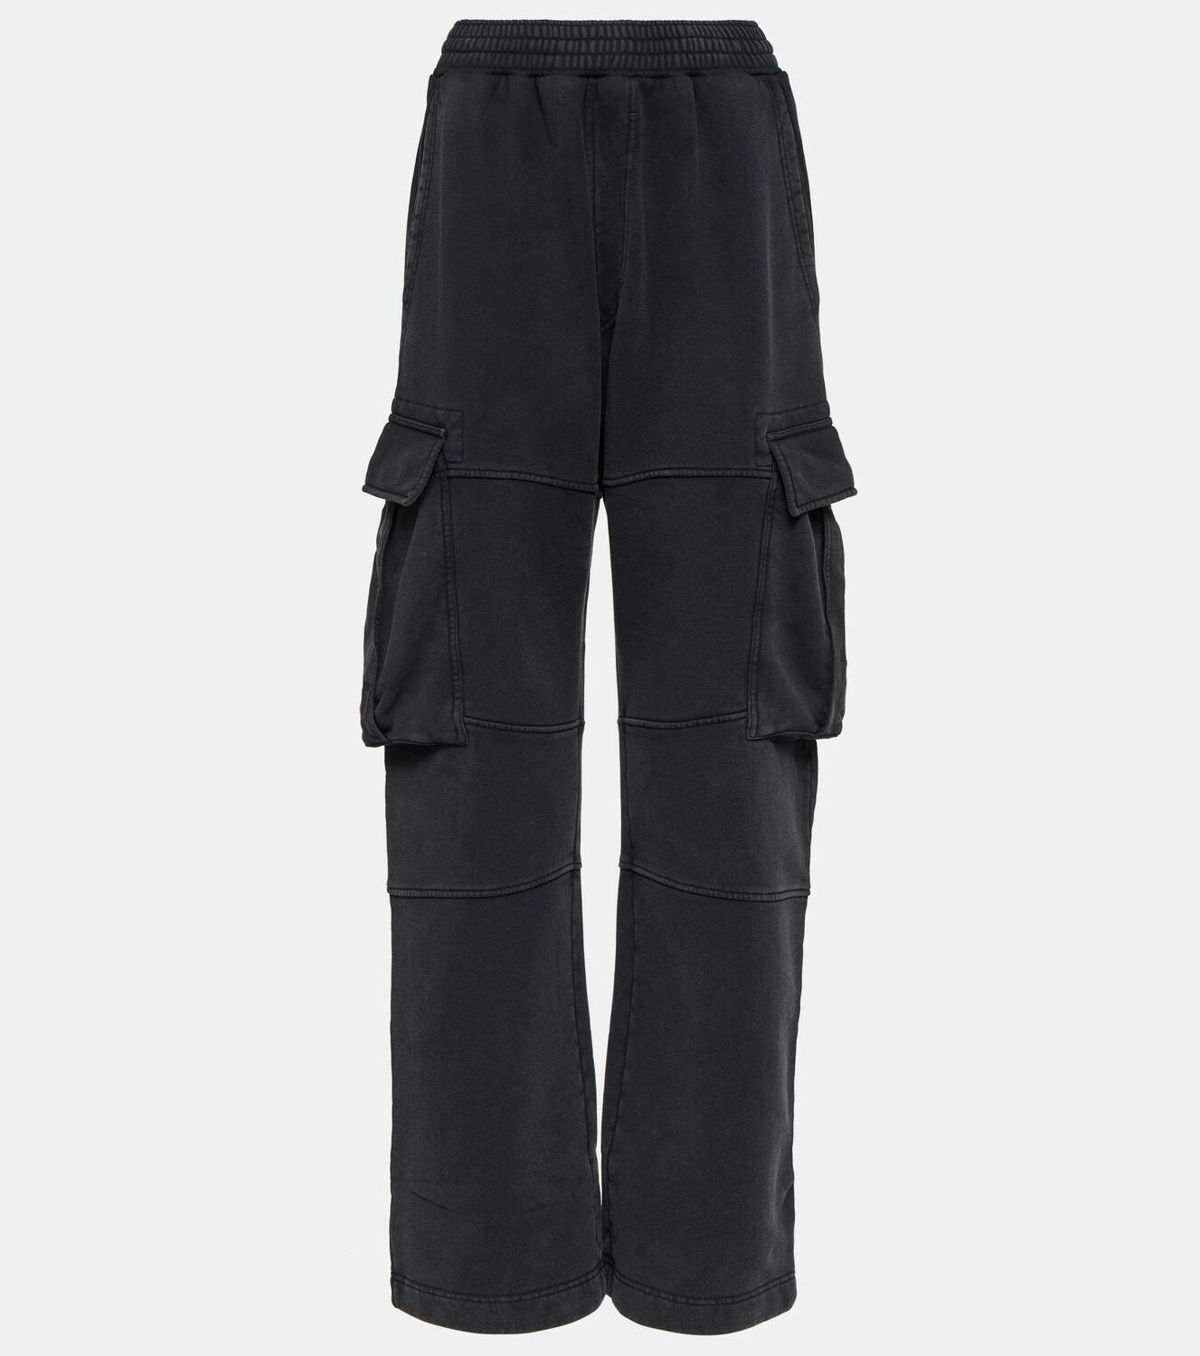 GIVENCHY Cotton-jersey cargo pants